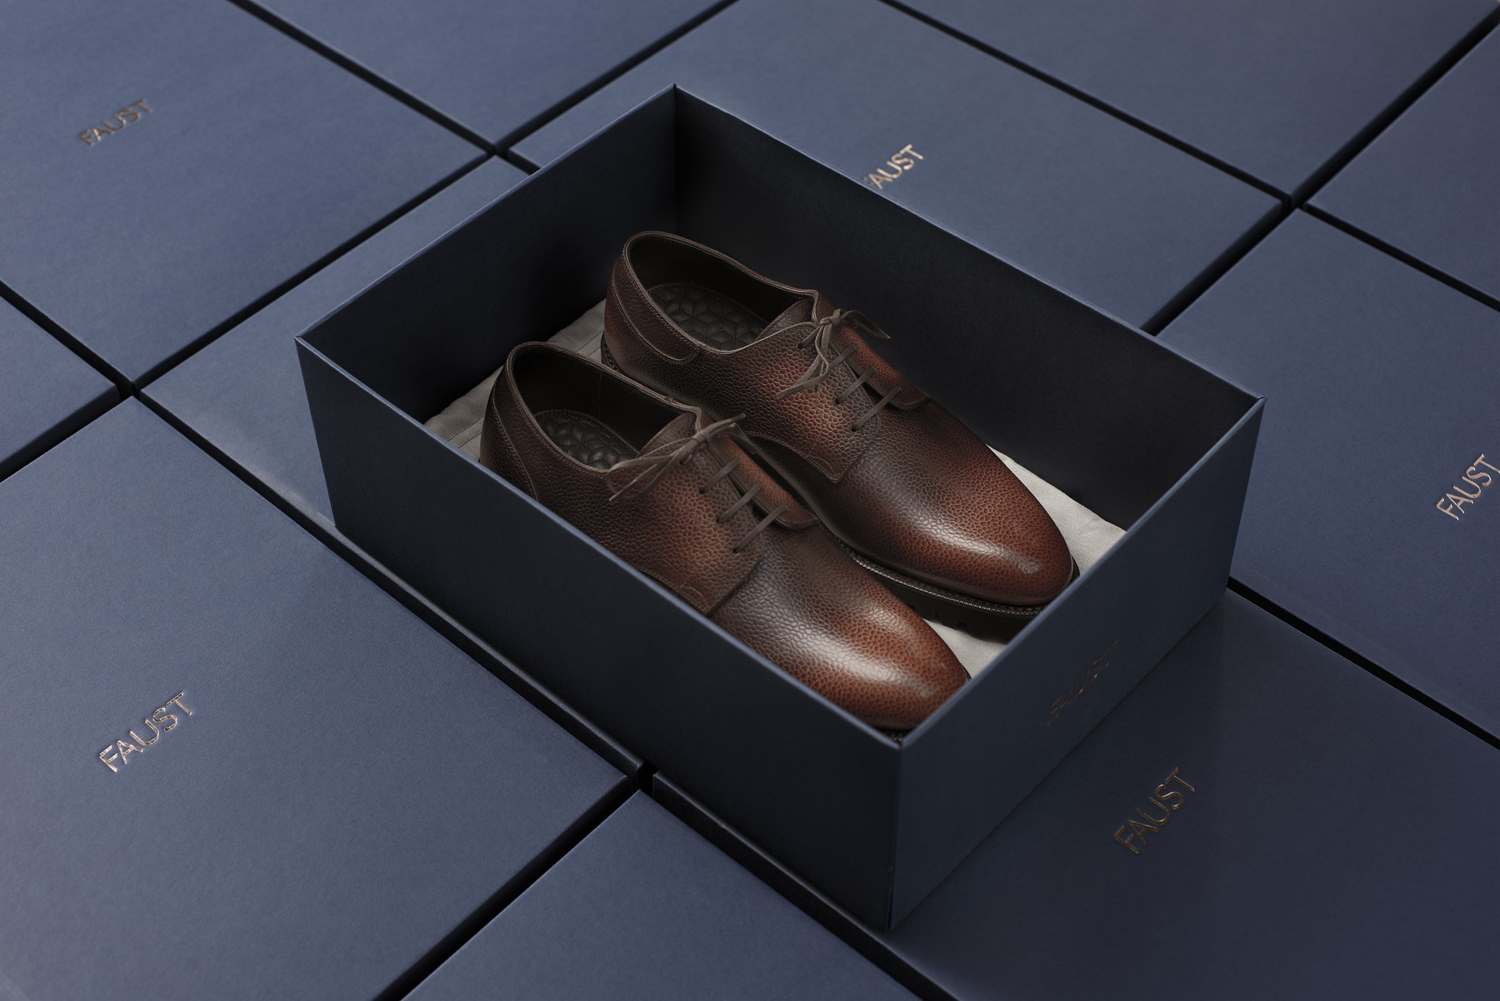 Brand identity and packaging design by Snøhetta for Oslo-based high-end shoemaker Faust